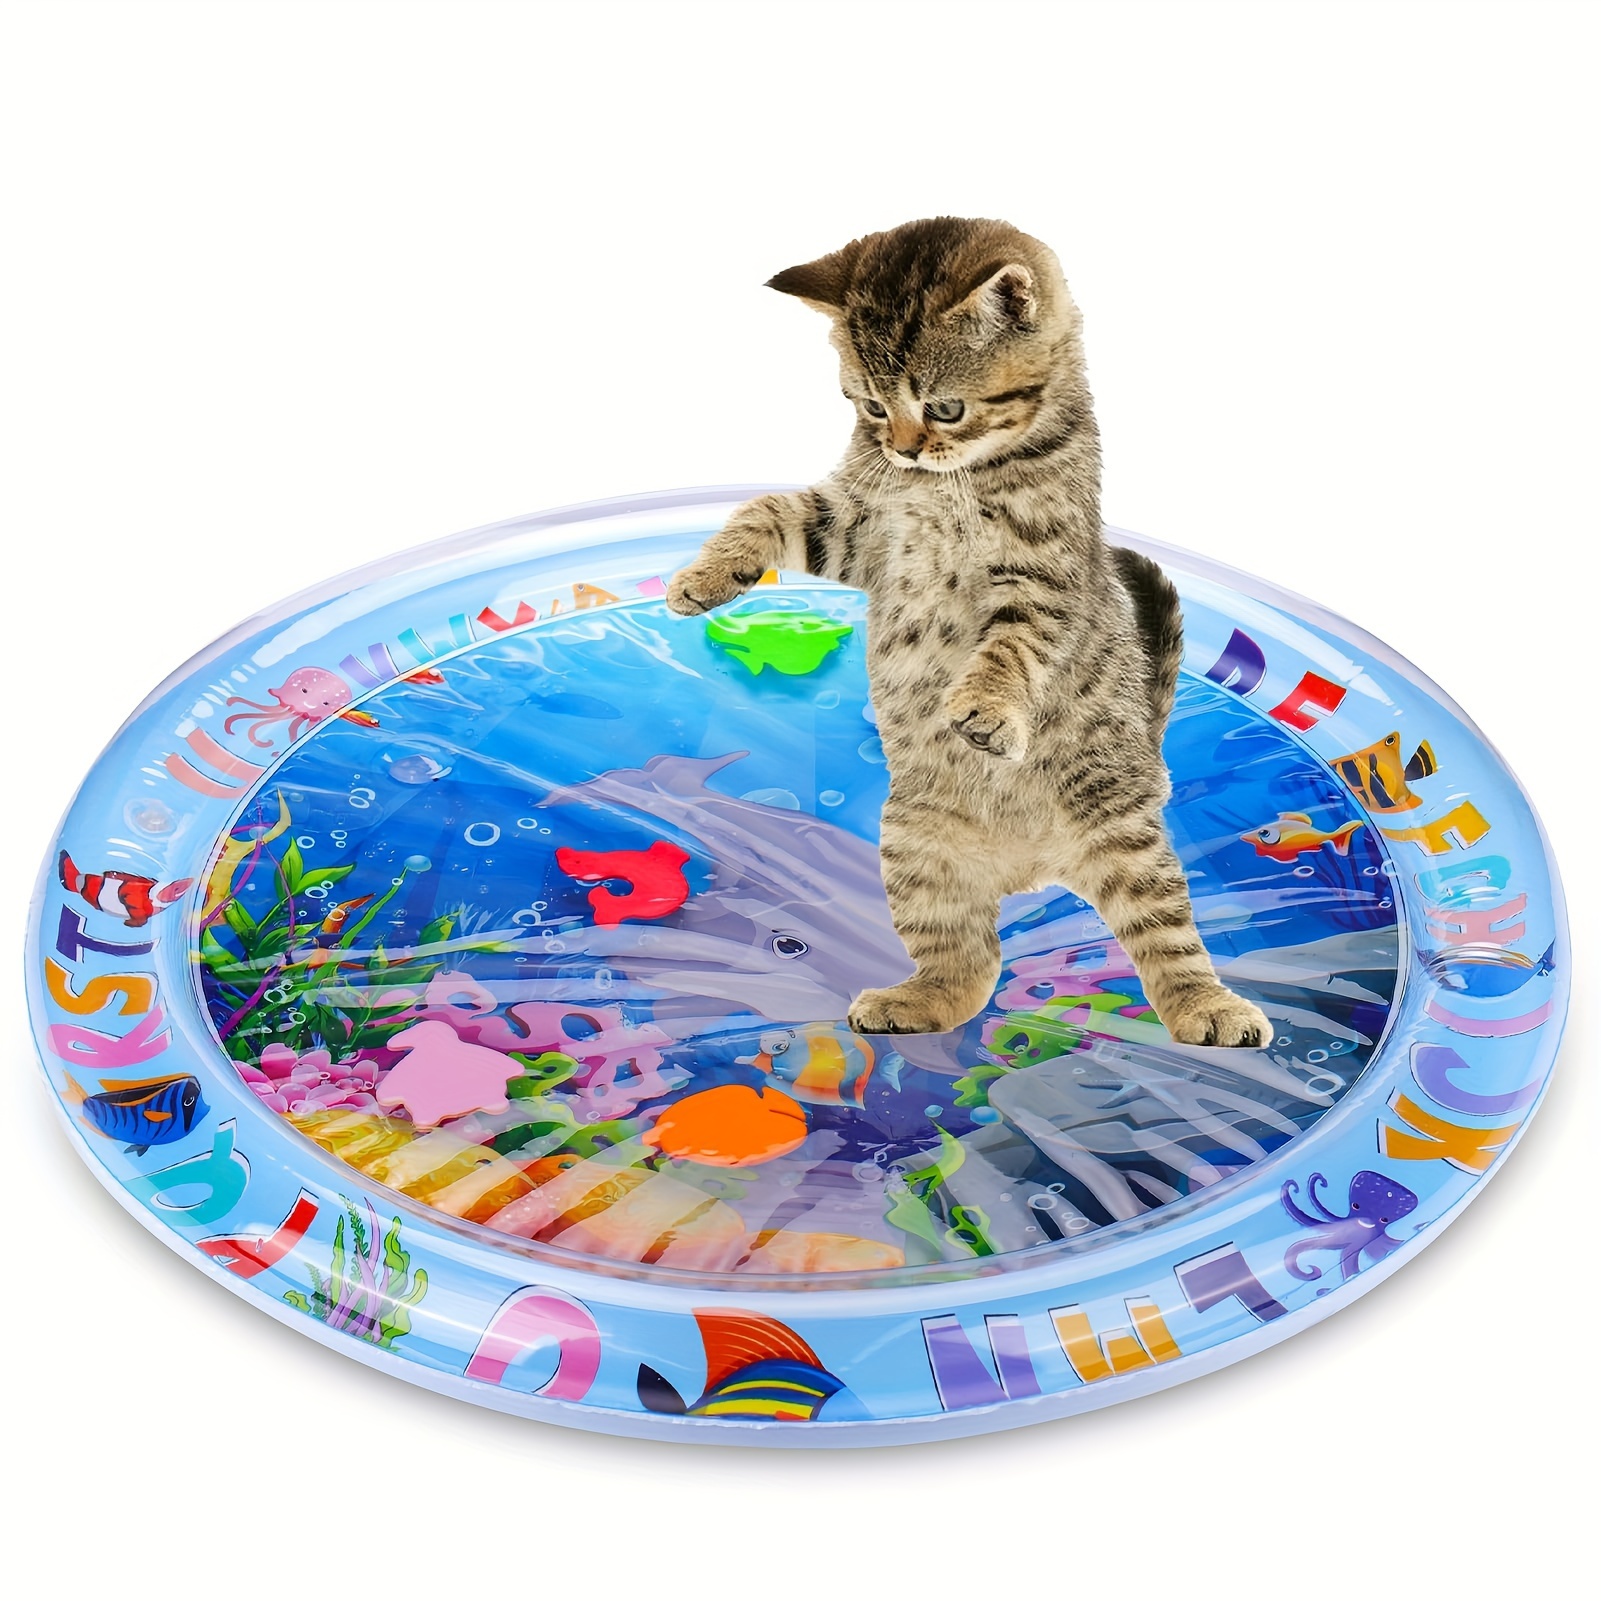 

Ocean-themed Inflatable Cat Play Mat With Floating Fish Toy - Interactive Water Sensory Pad For Indoor Cats, Cooling & Exercise Cat Fish Toy Flopping Fish Cat Toy